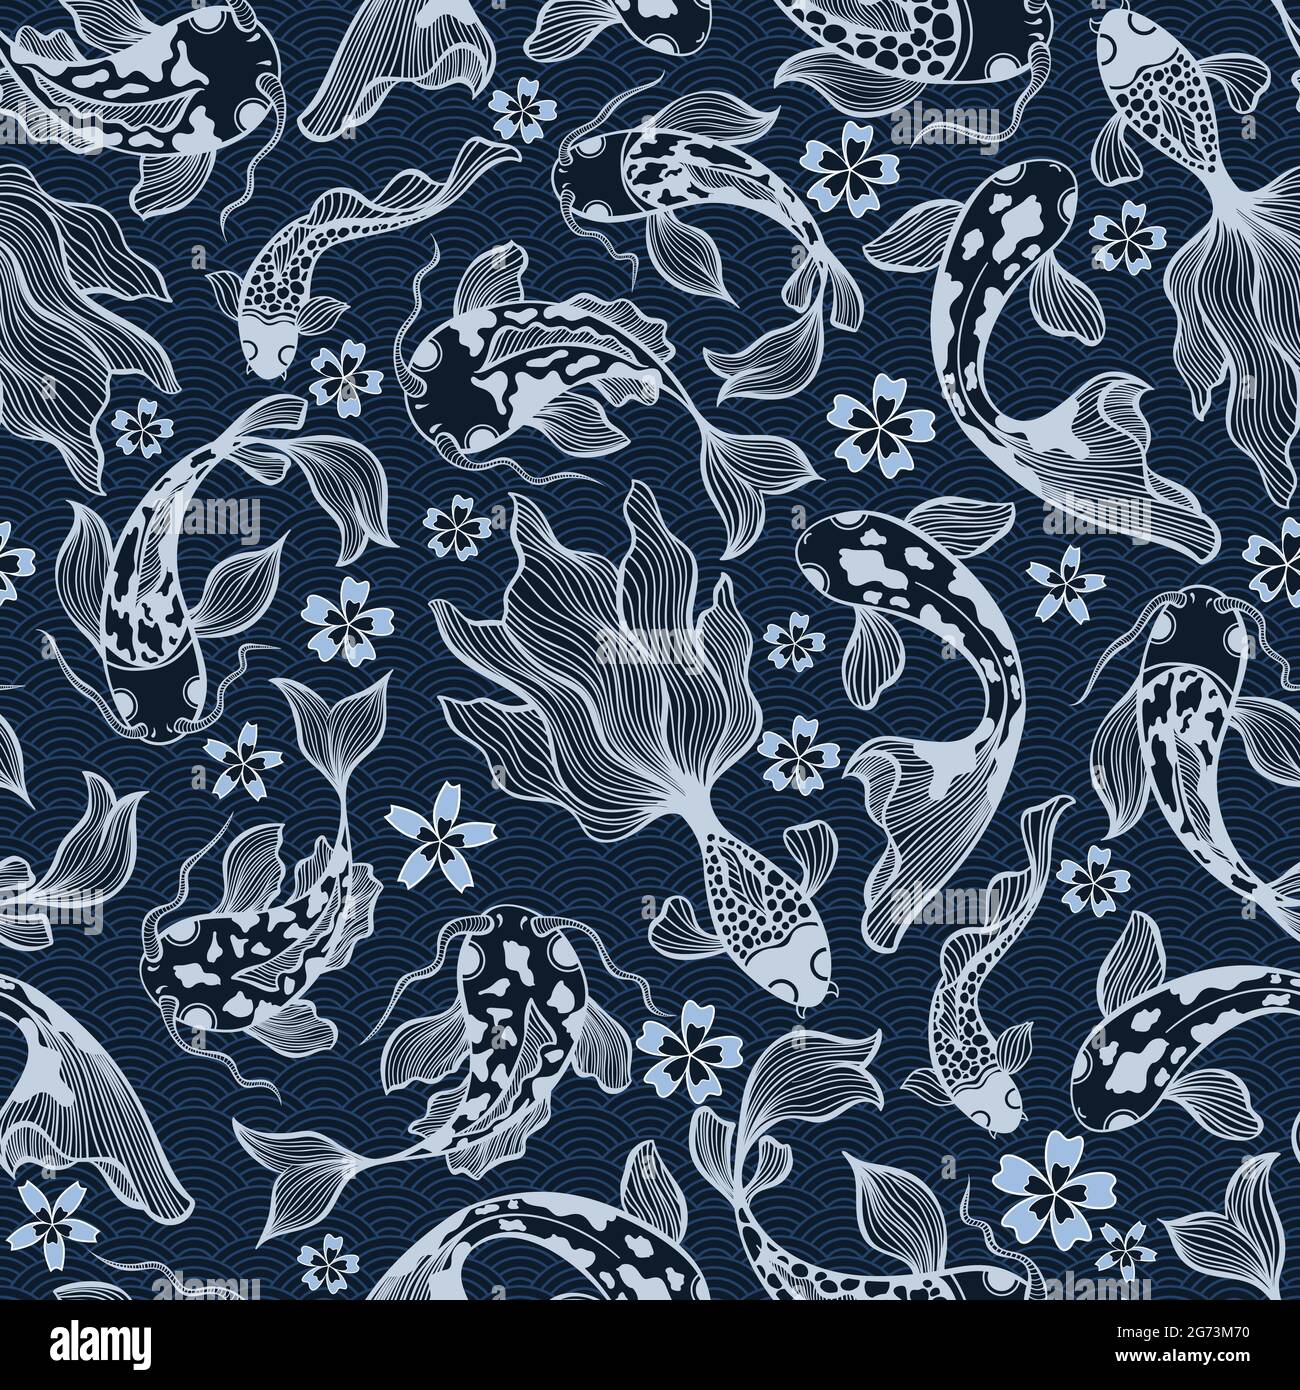 https://c8.alamy.com/comp/2G73M70/japanese-koi-fish-vector-seamless-pattern-in-deep-blue-colors-for-fabric-textile-2G73M70.jpg